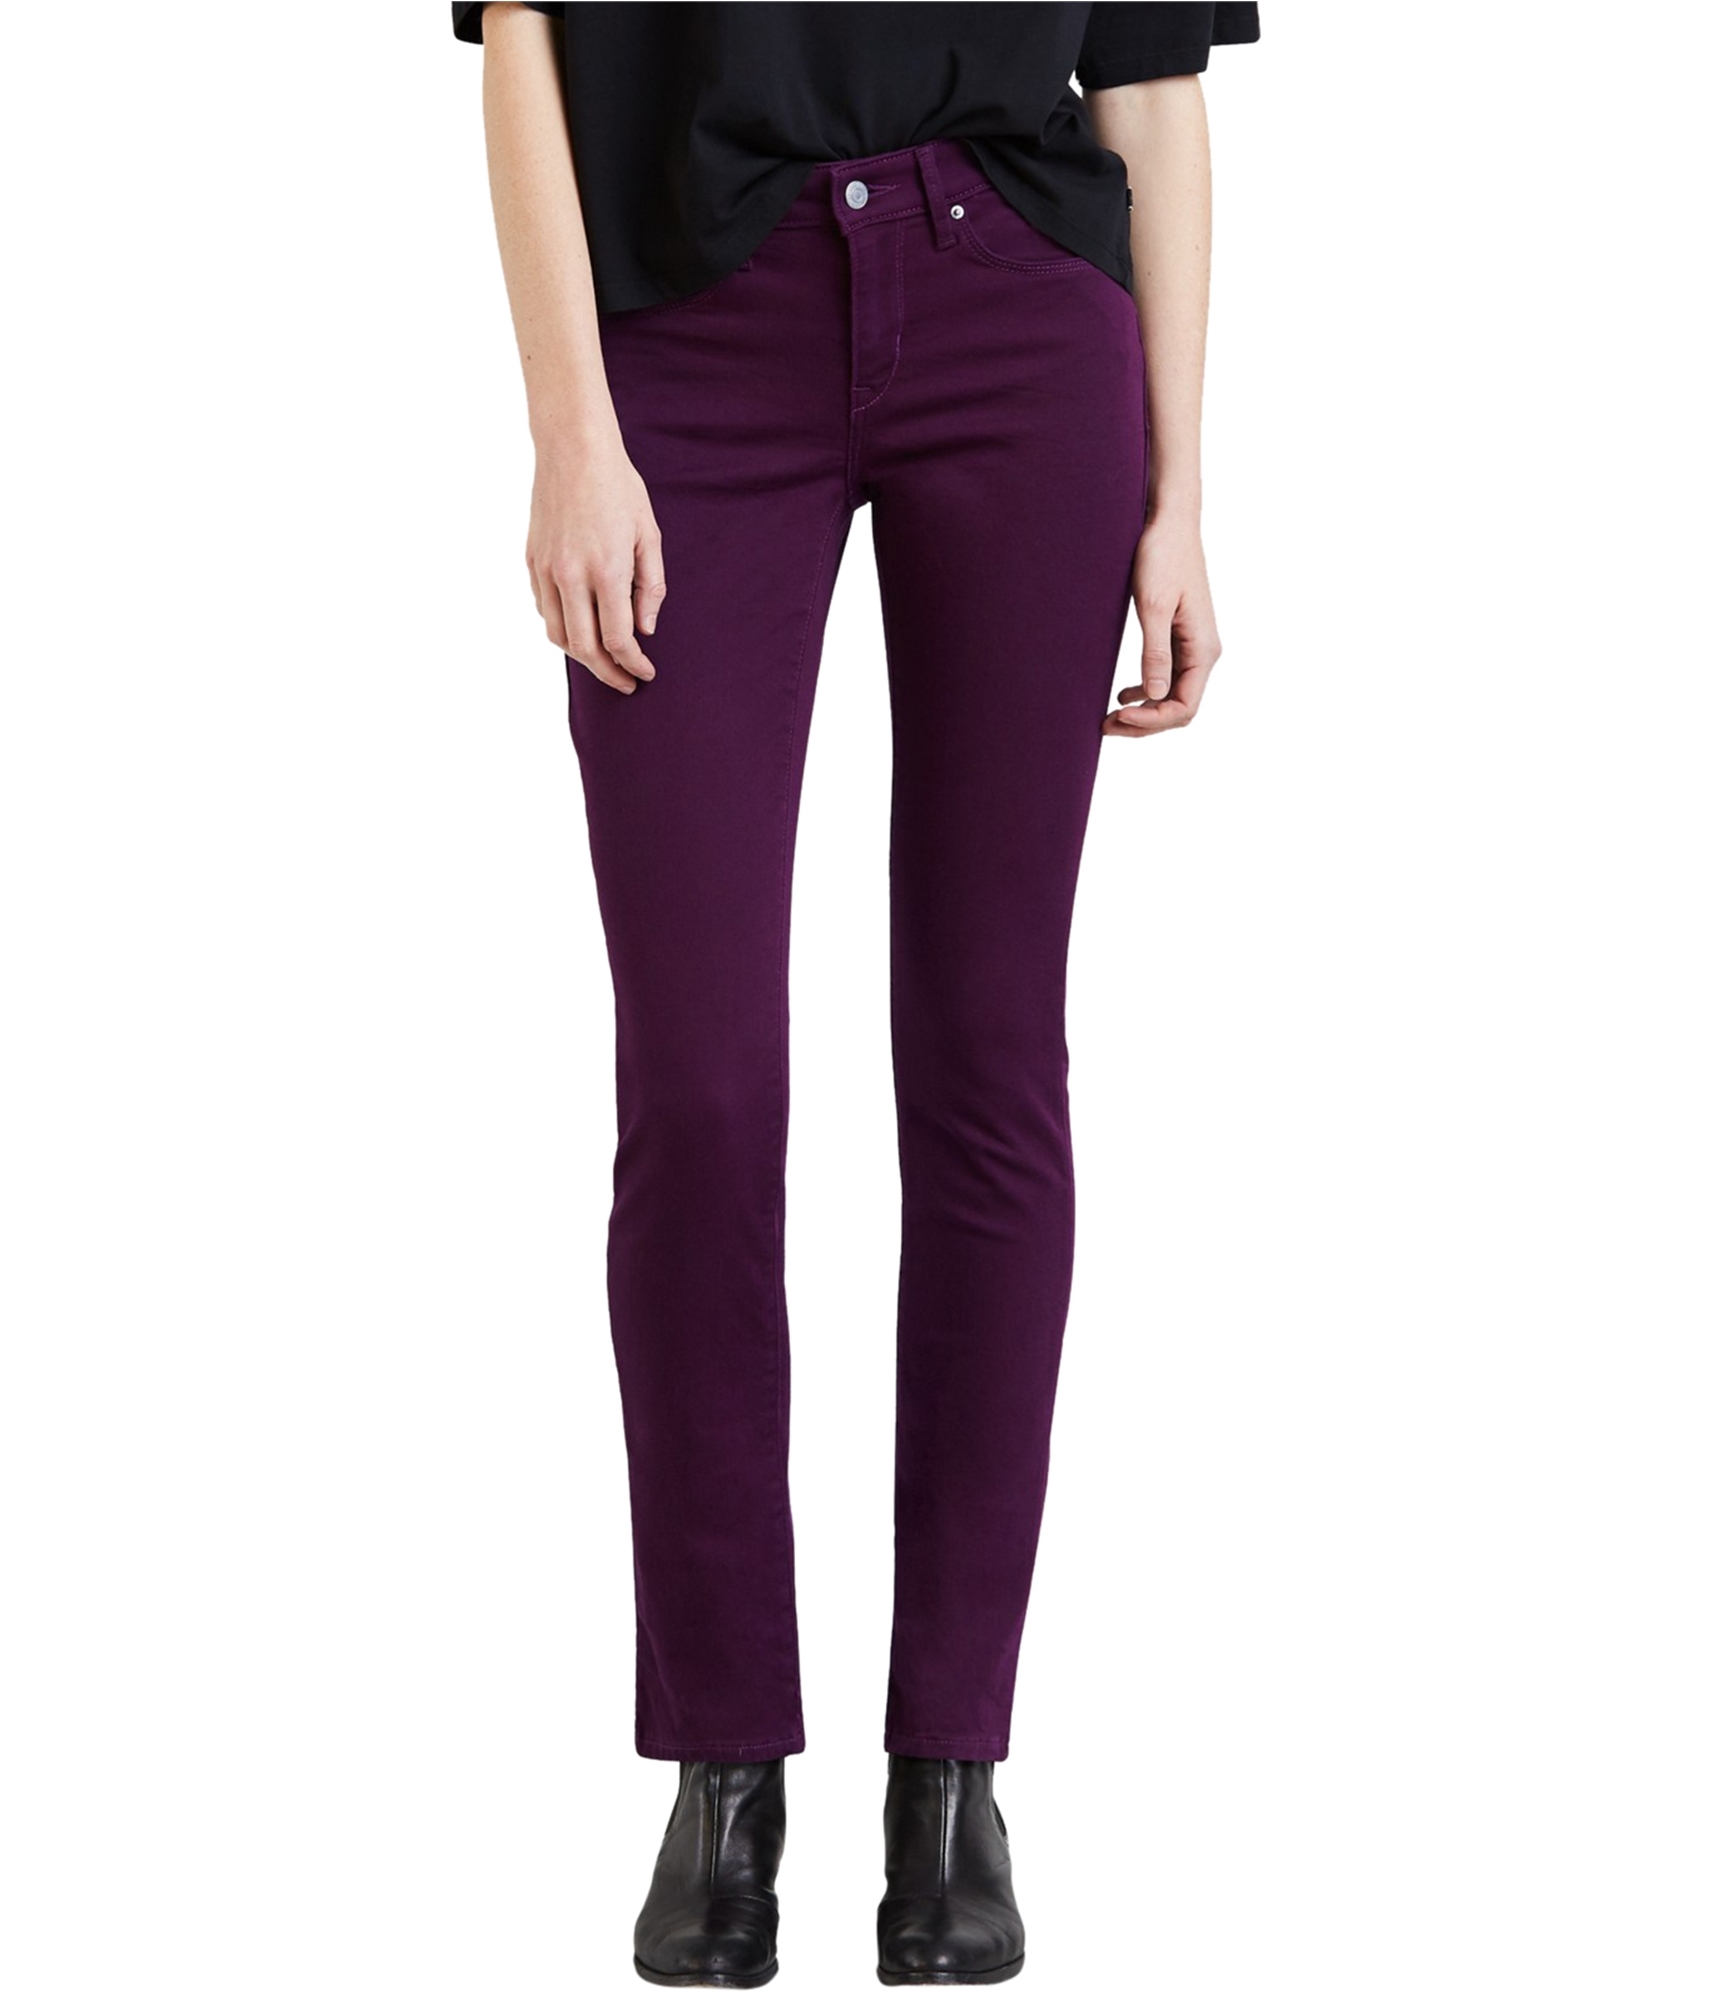 Buy a Womens Levi's Classic Mid Rise Skinny Fit Jeans Online |  TagsWeekly.com, TW1